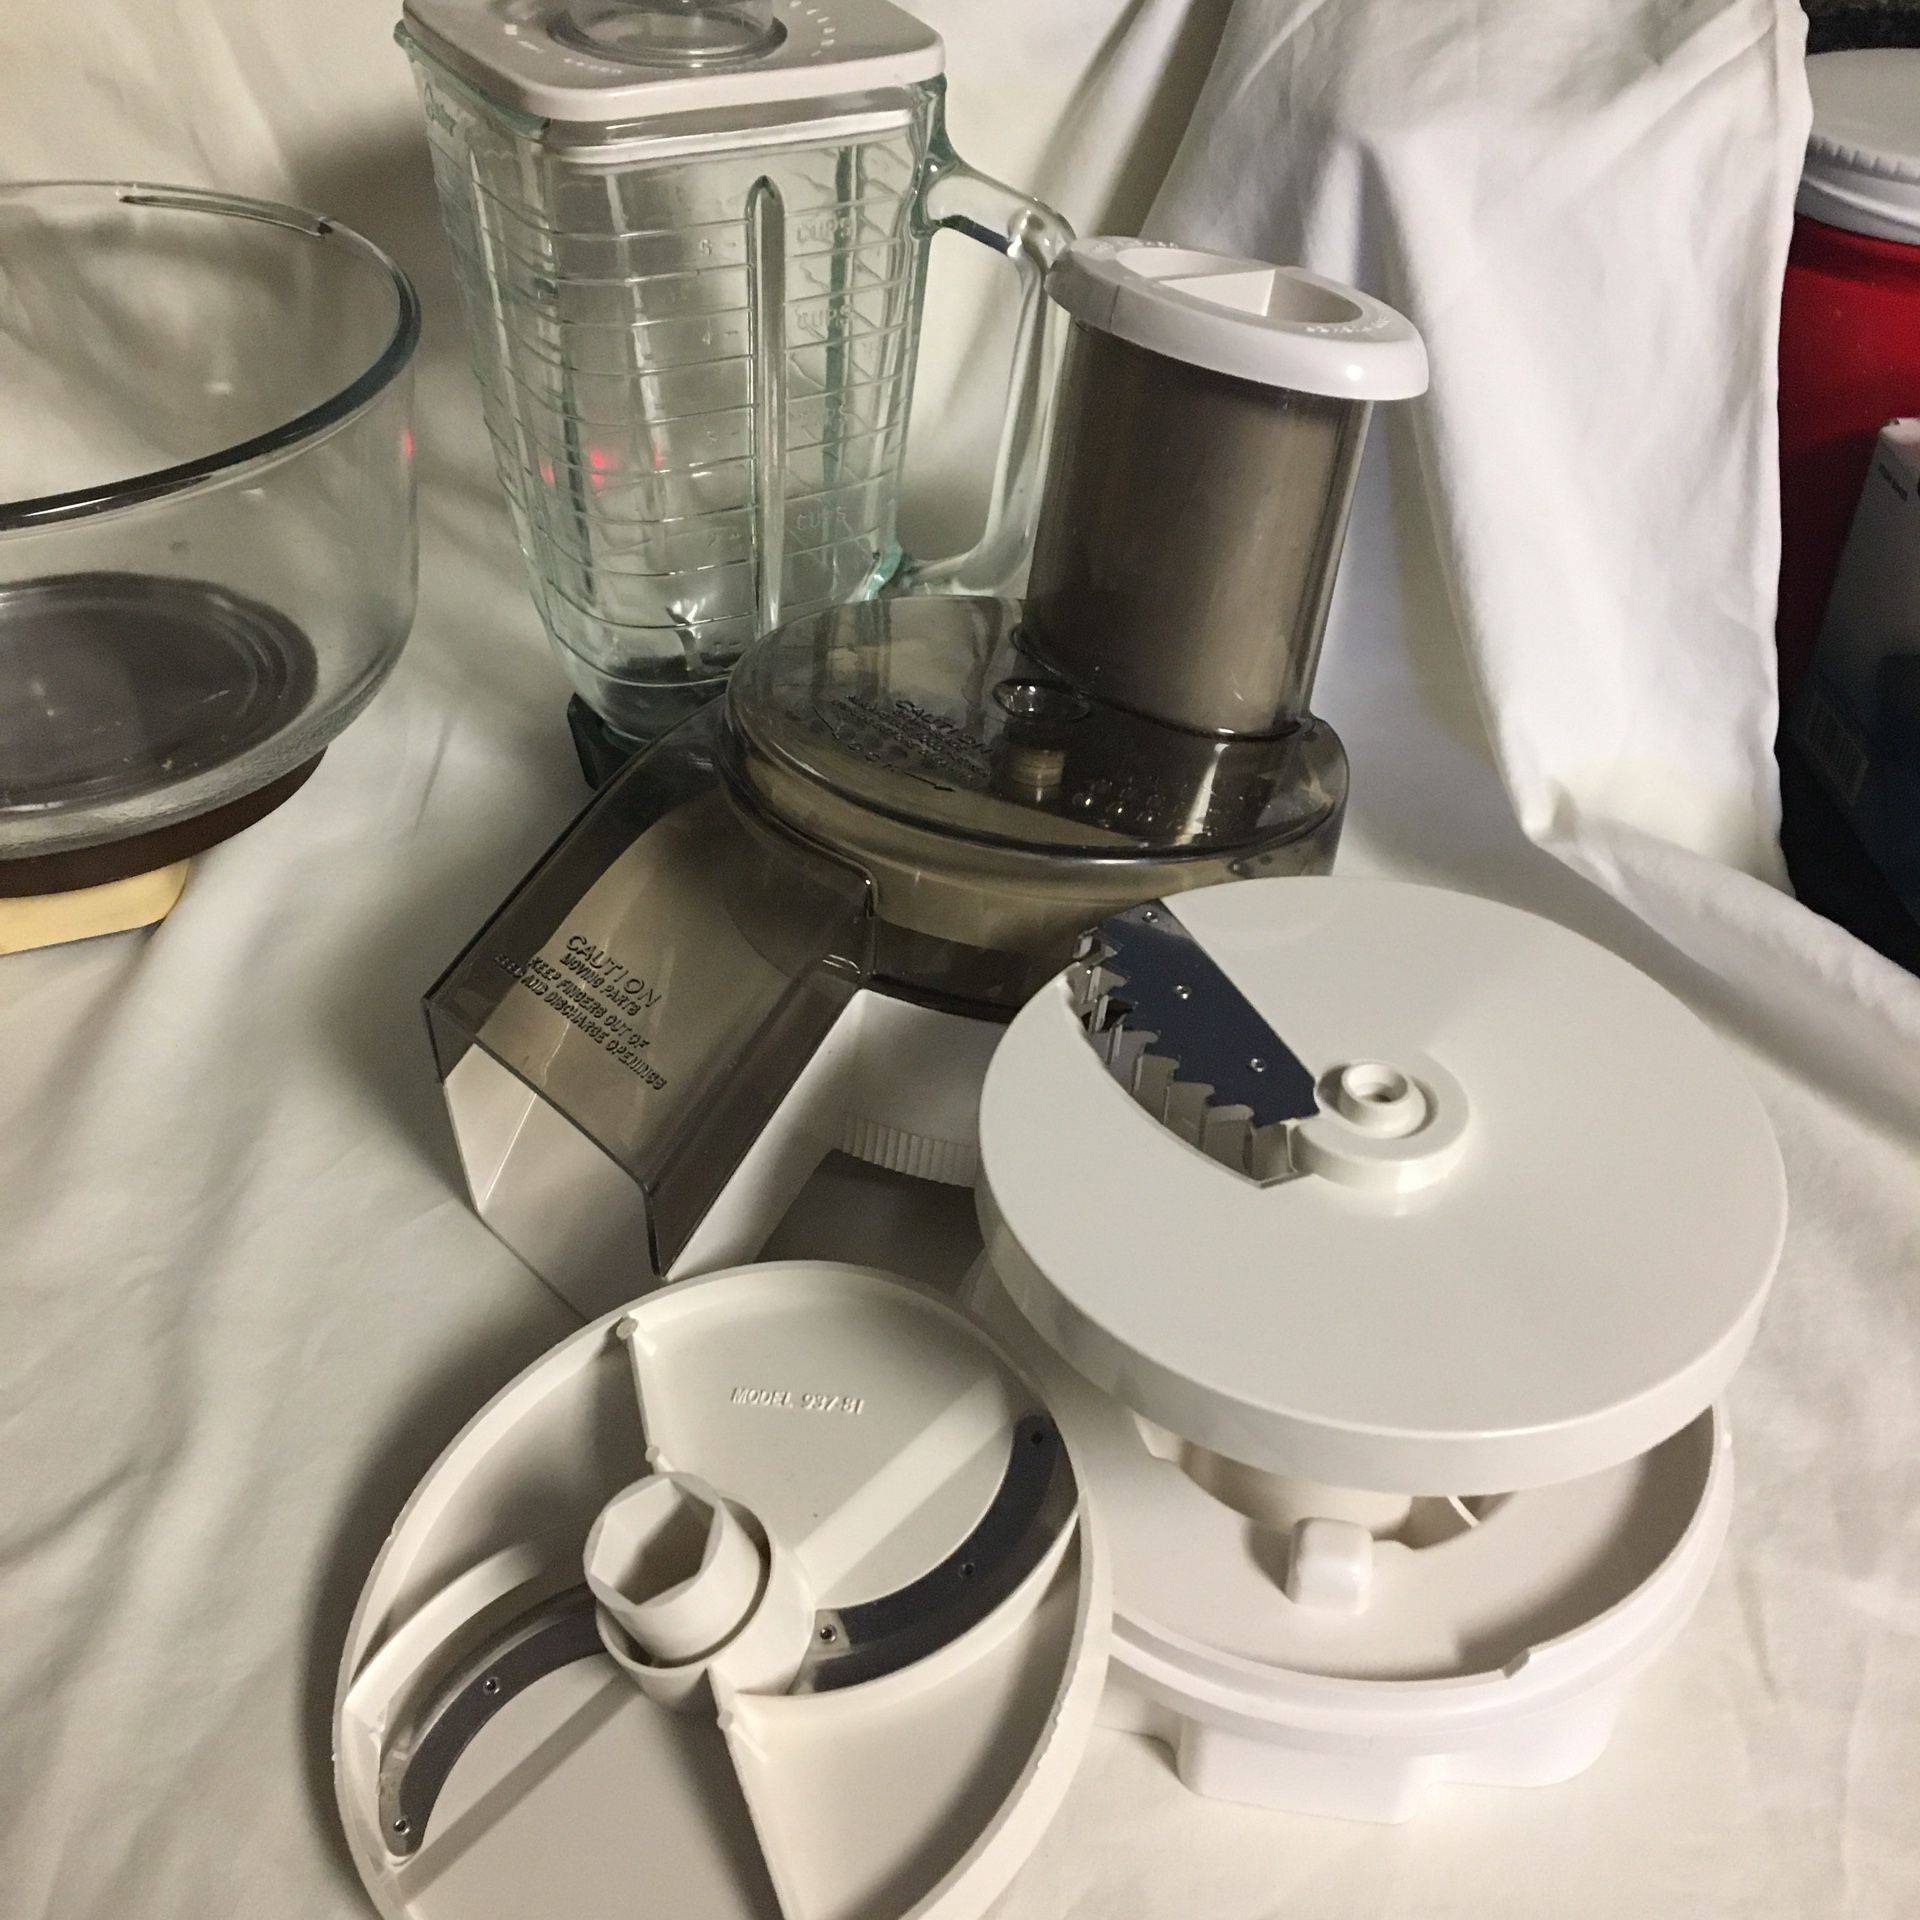 Oster Deep Fryer Stainless Steel for Sale in Centreville, VA - OfferUp